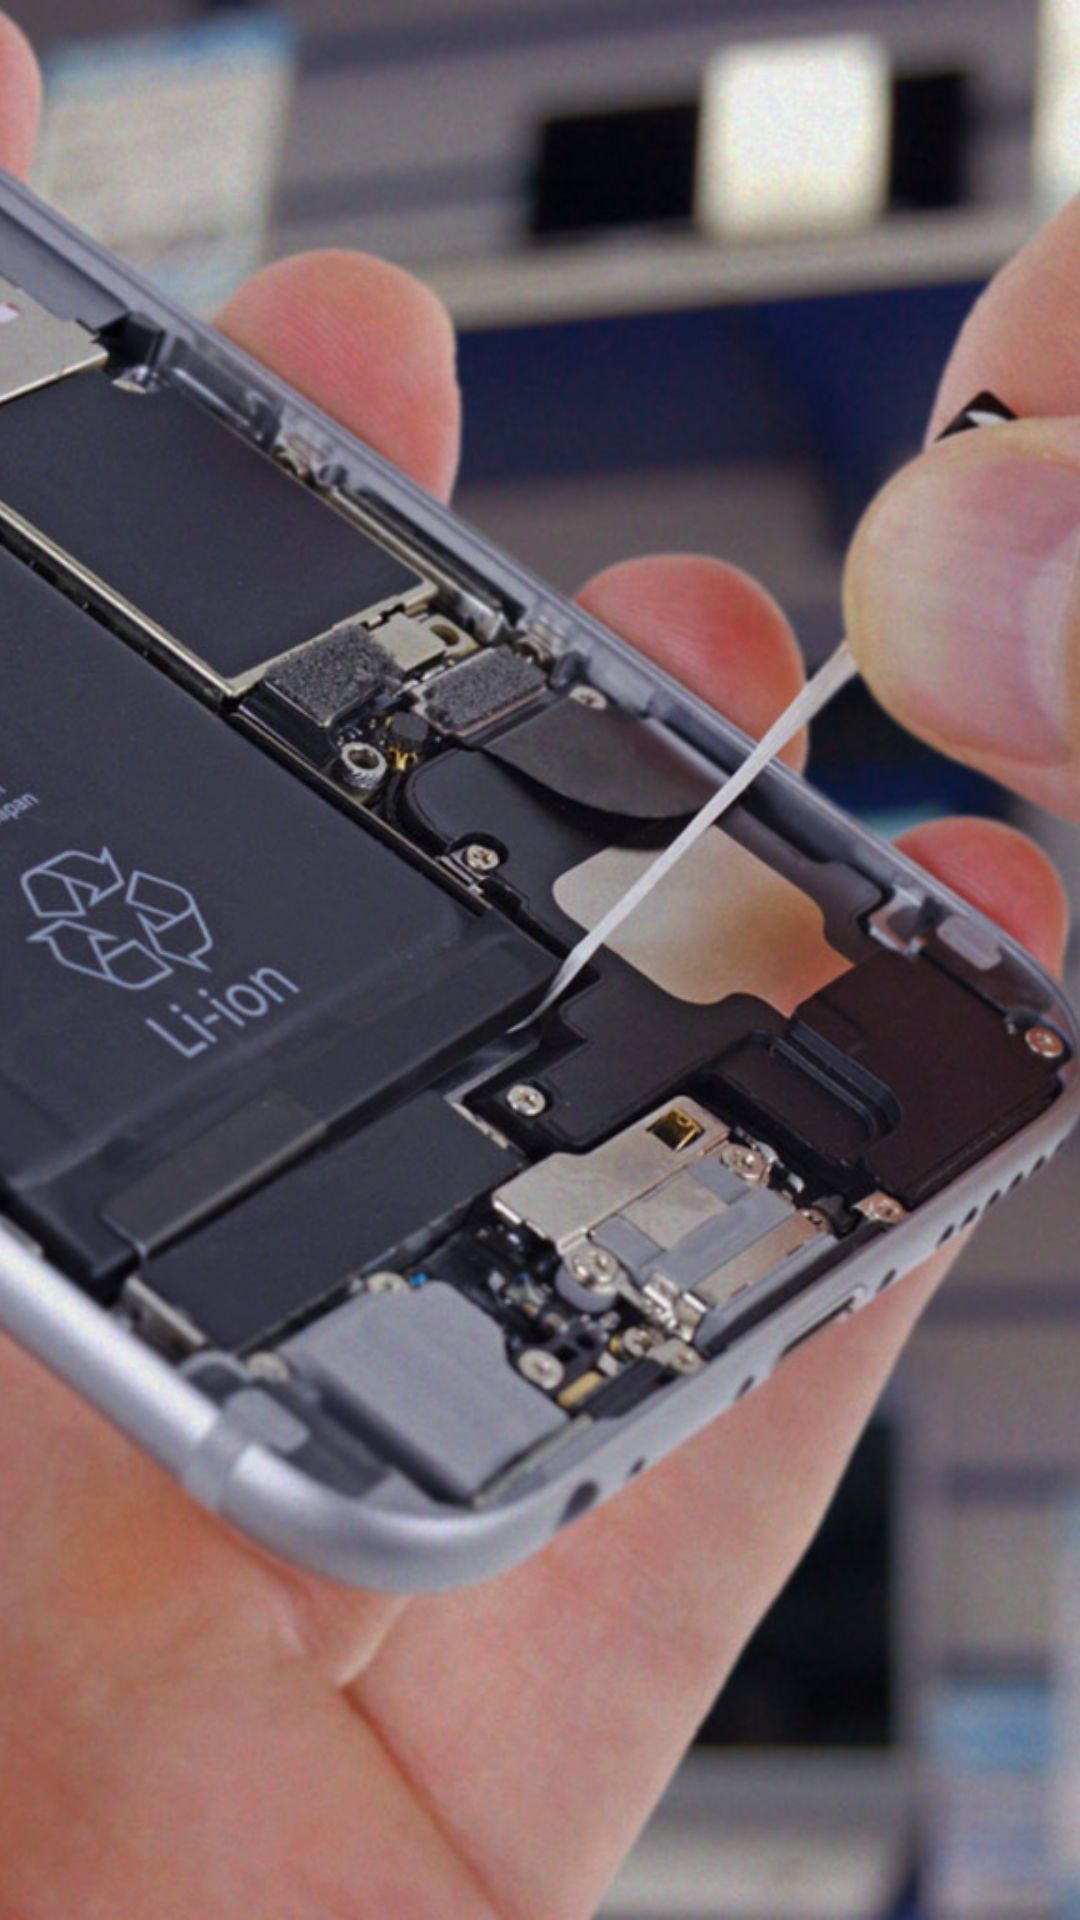 Why do smartphones have a non-removal battery these days? Here are